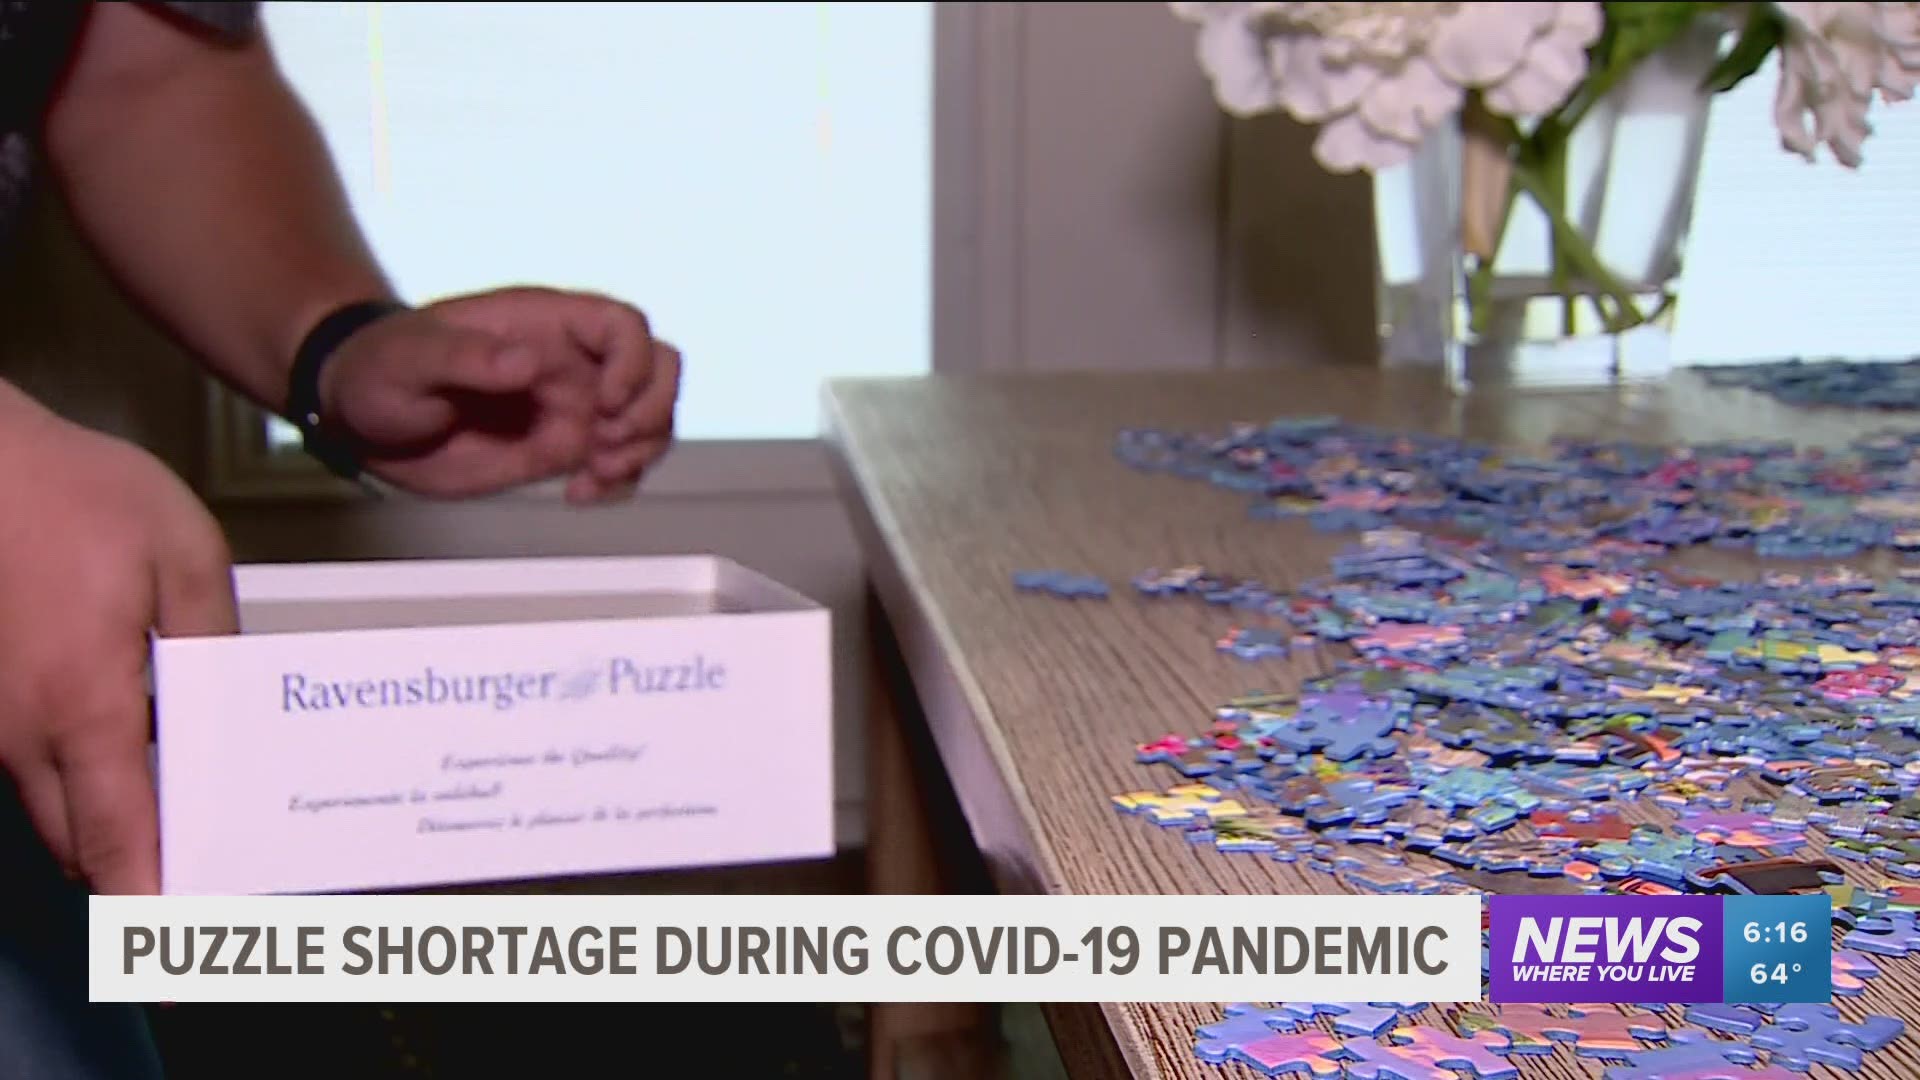 Puzzle shortage during COVID-19 pandemic